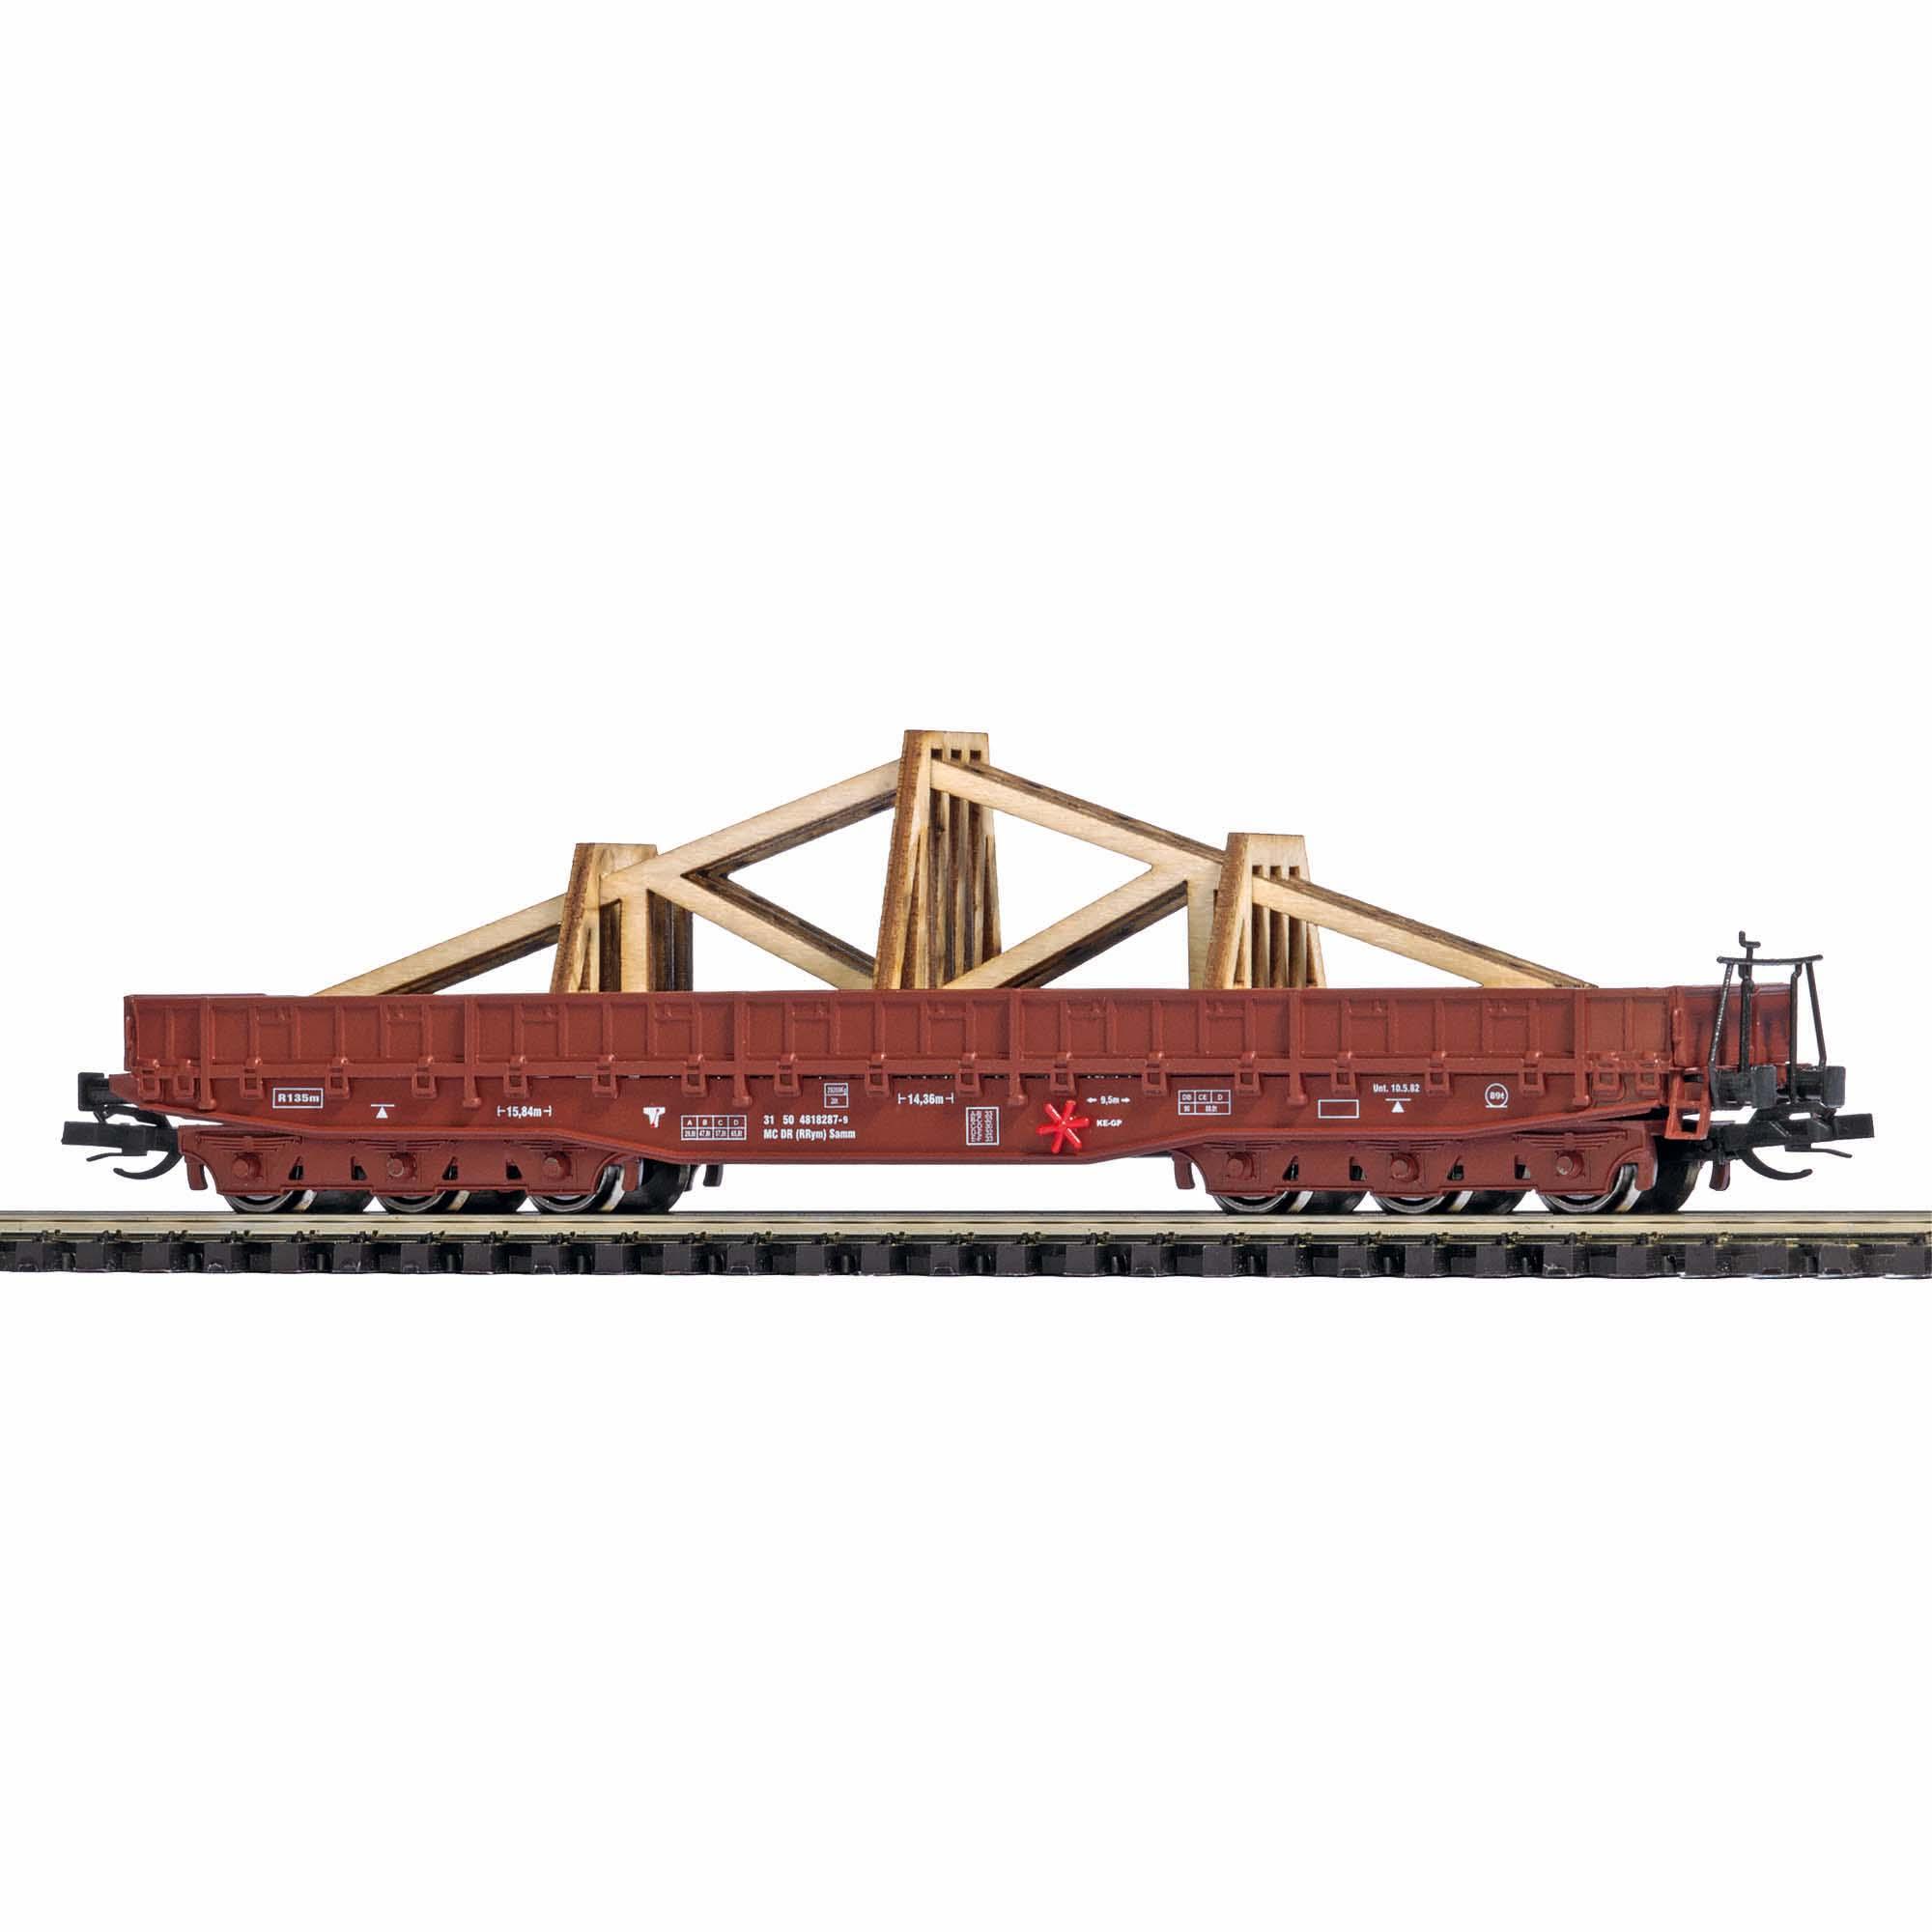 Busch 31175 Flat wagon with roof truss load